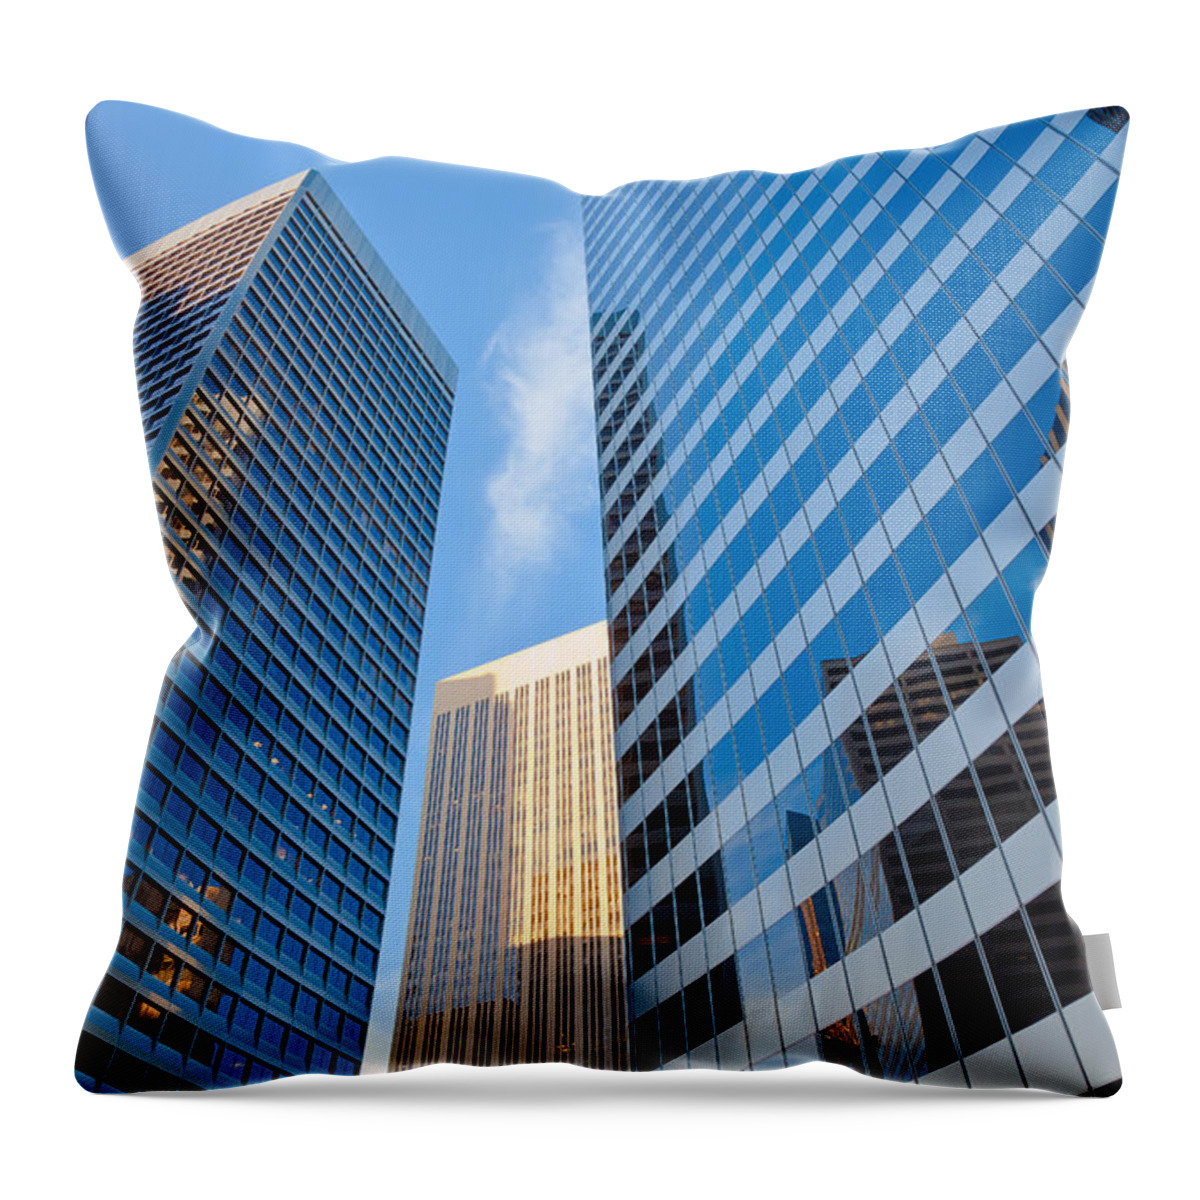 City Throw Pillow featuring the photograph City In Reflections by Jonathan Nguyen